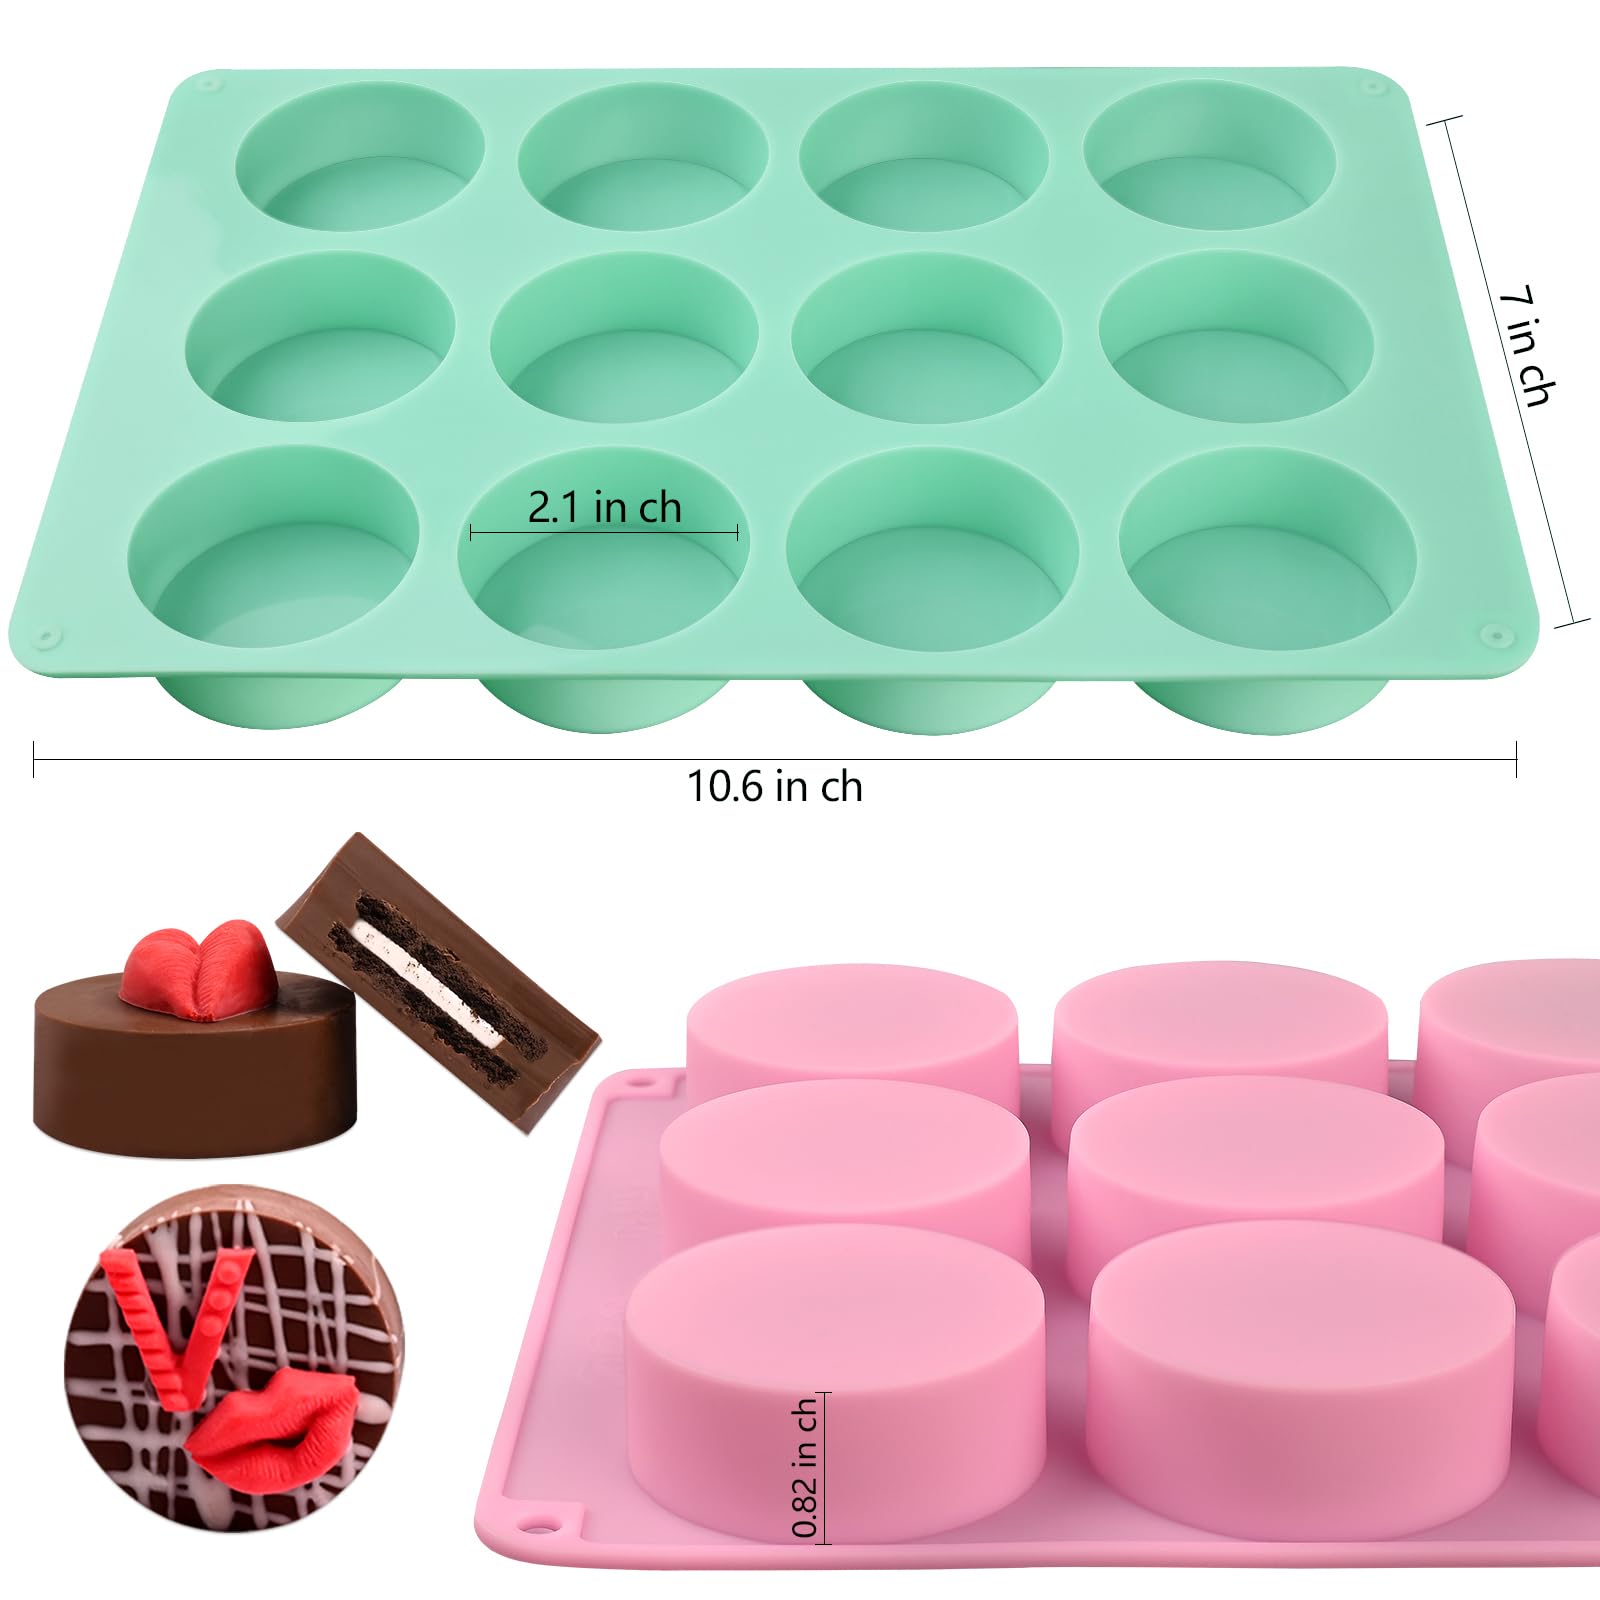 Actvty Round Chocolate Cookie Molds, New Size 12-Cavity Cylinder Chocolate Cover Cookie Silicone Molds for Candy Mini Cakes Jelly Baking（2 Pack）